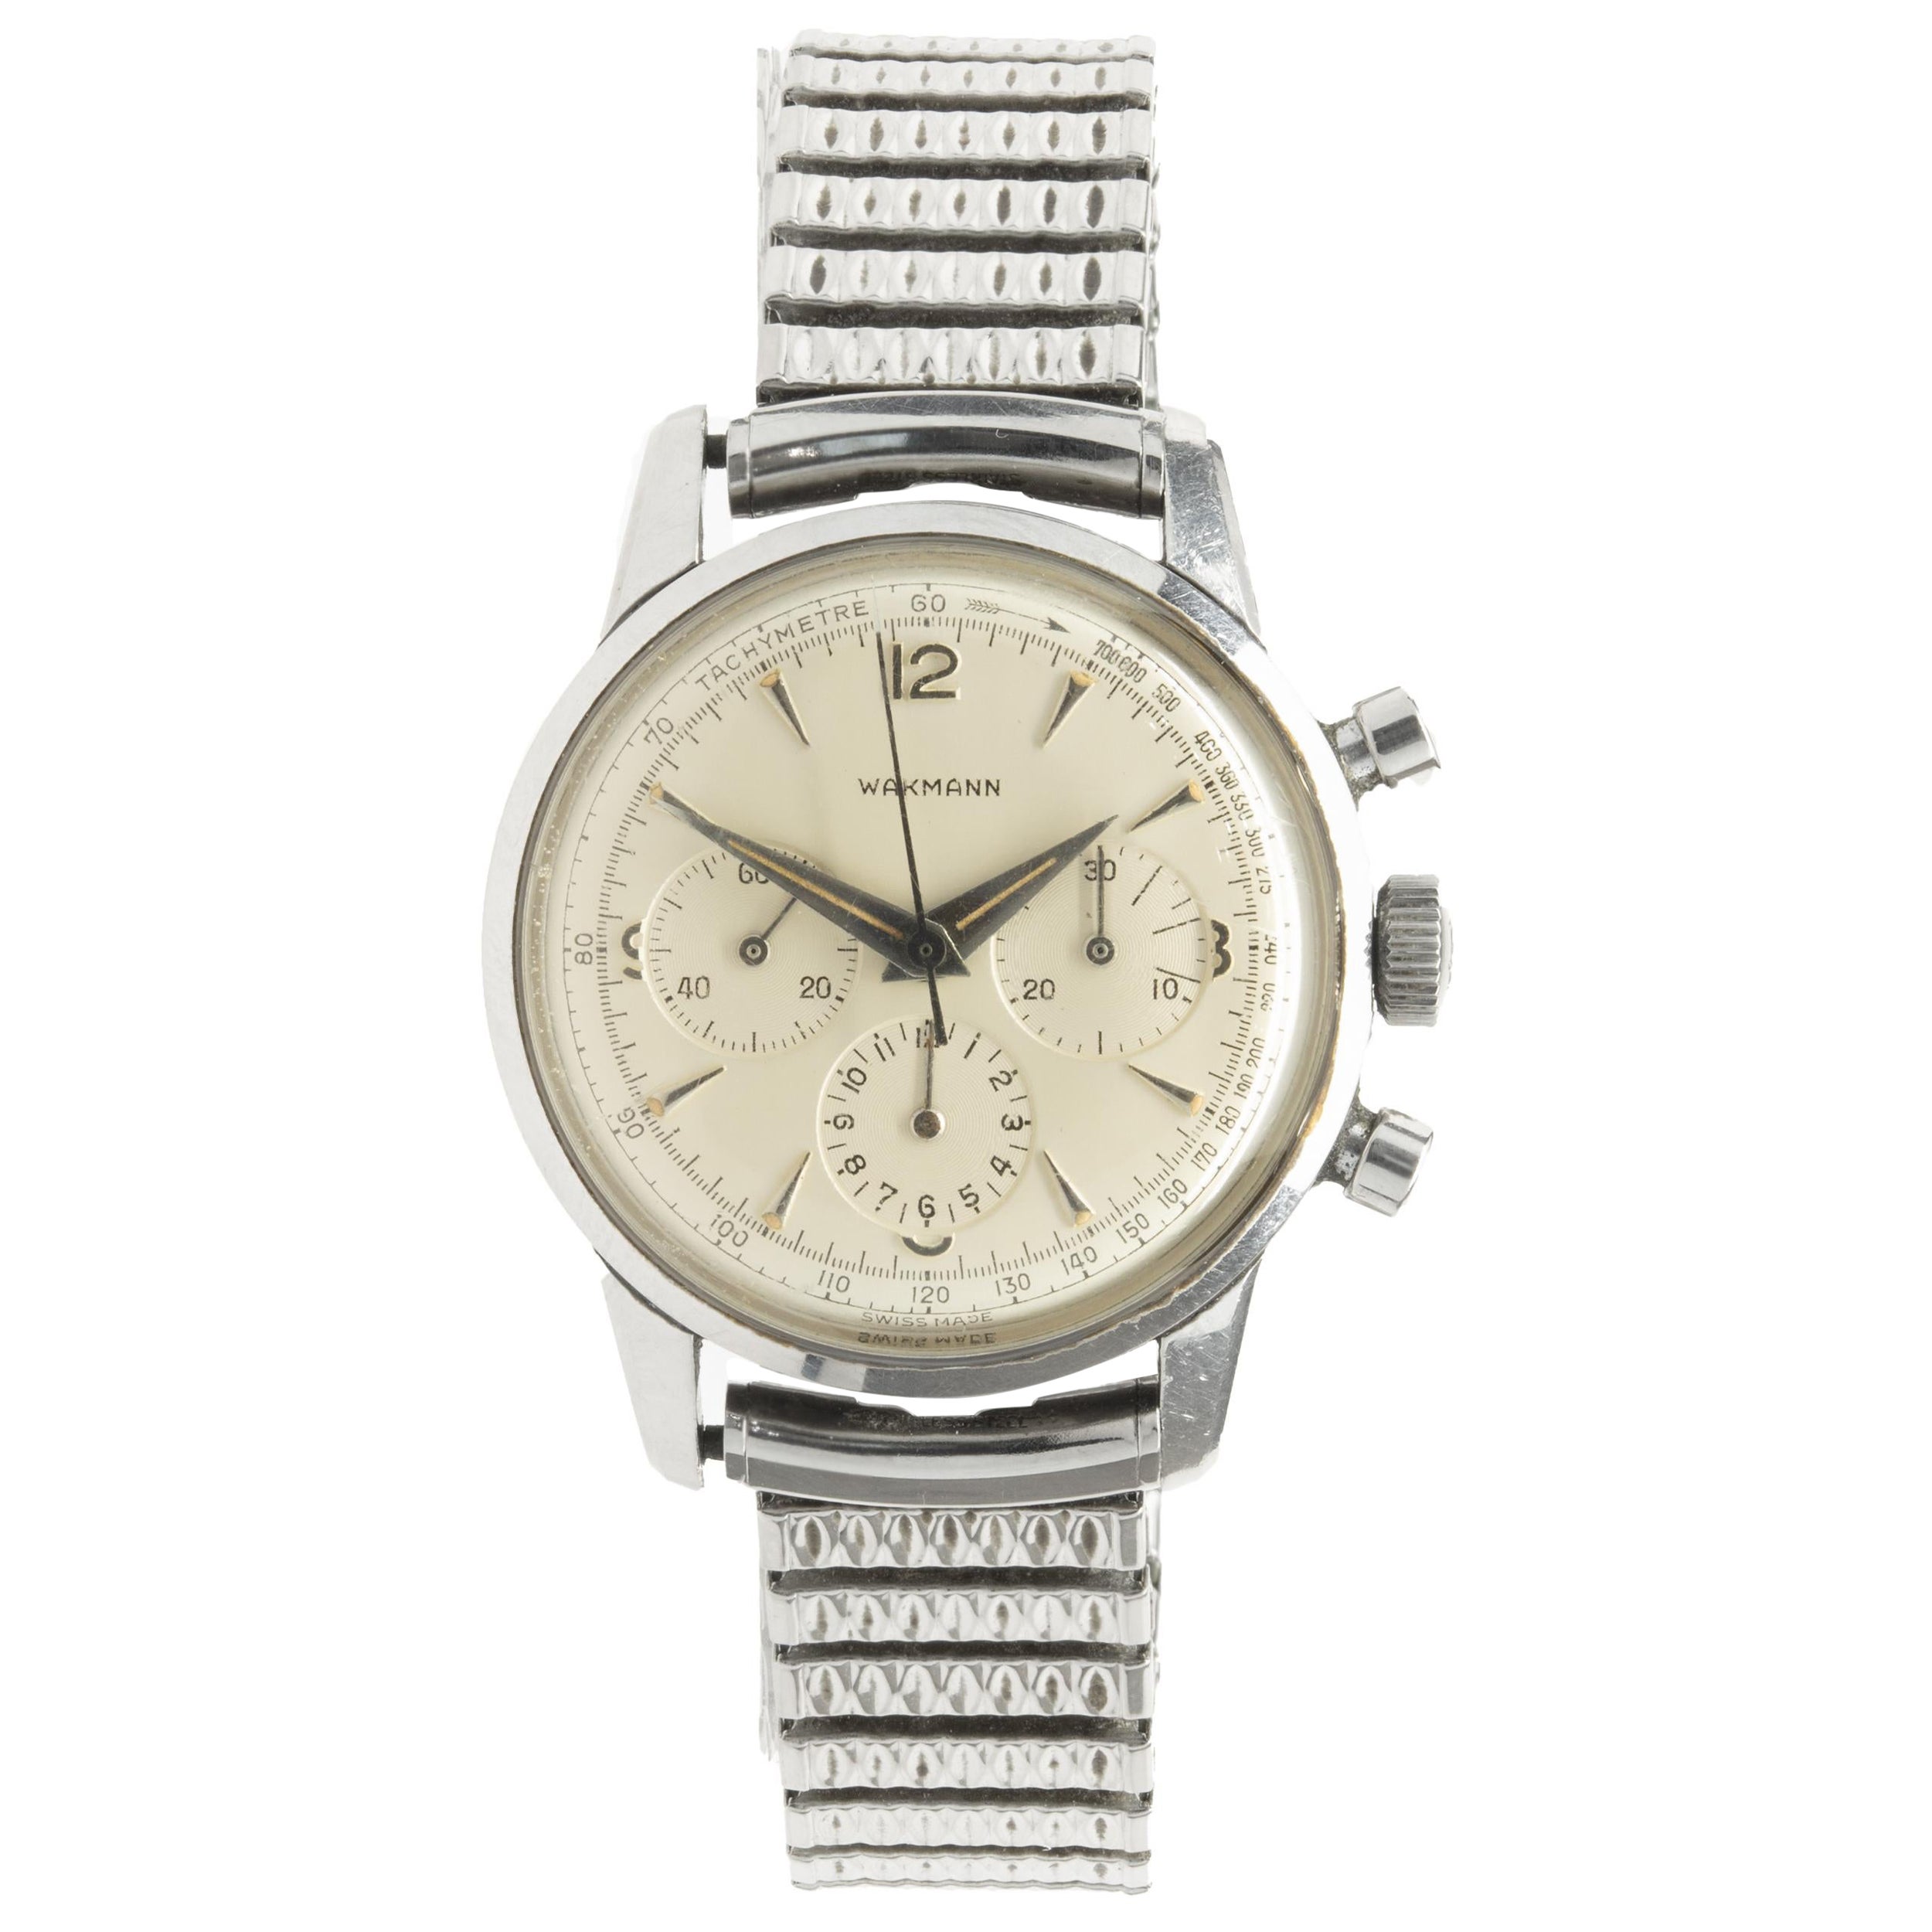 Walkmann Stainless Steel Vintage Chronograph For Sale